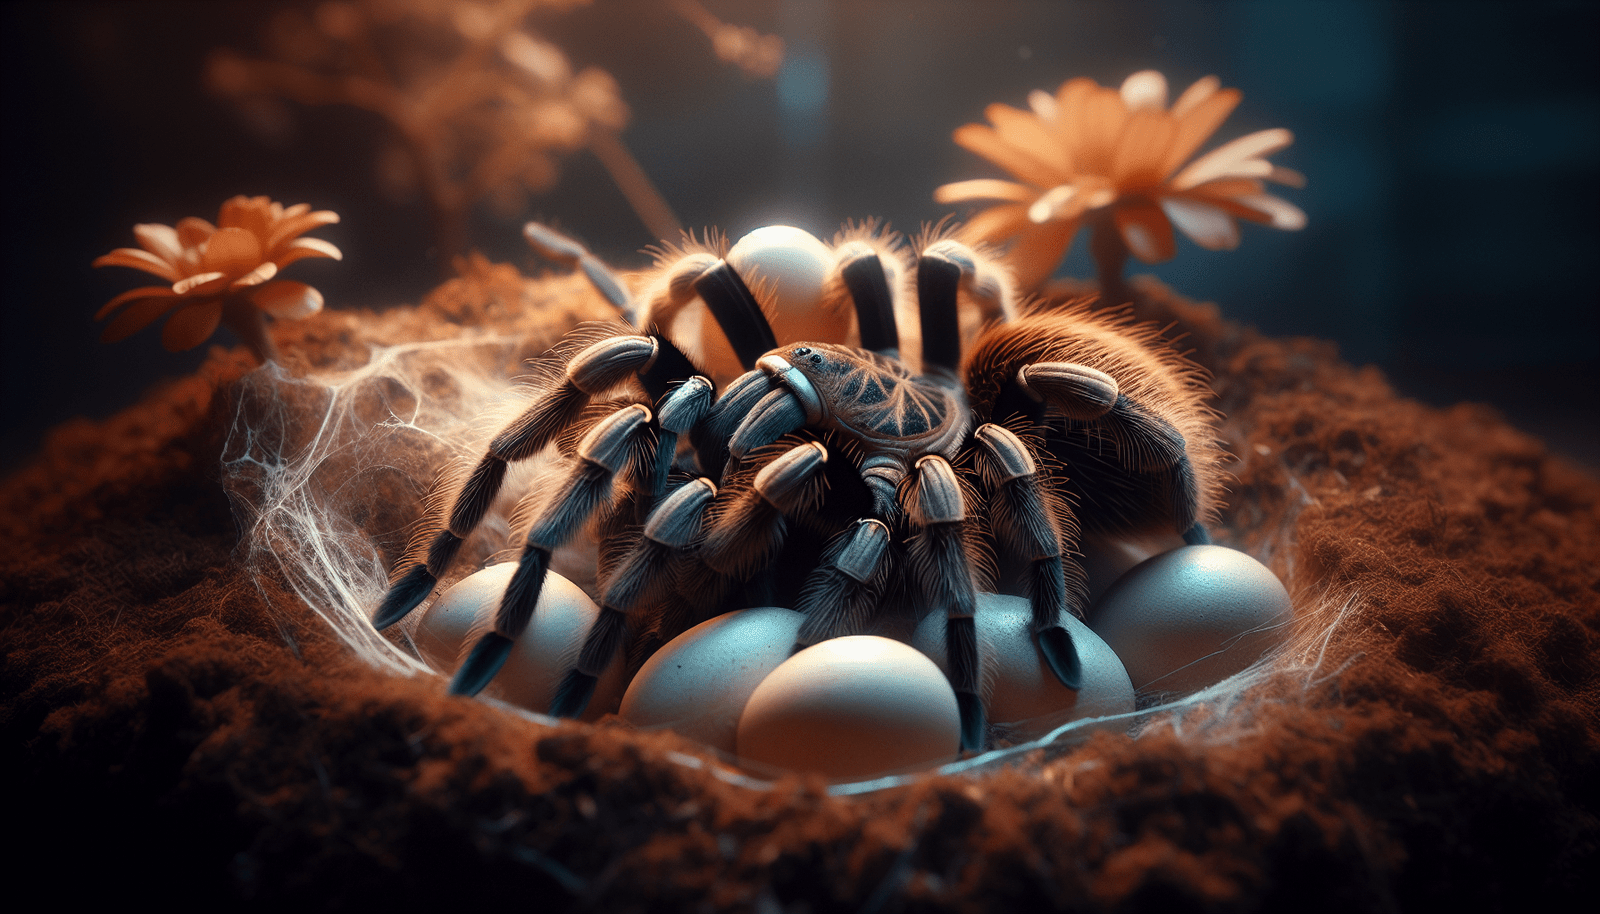 How Do I Ensure The Safety Of Both Male And Female Tarantulas During Mating?